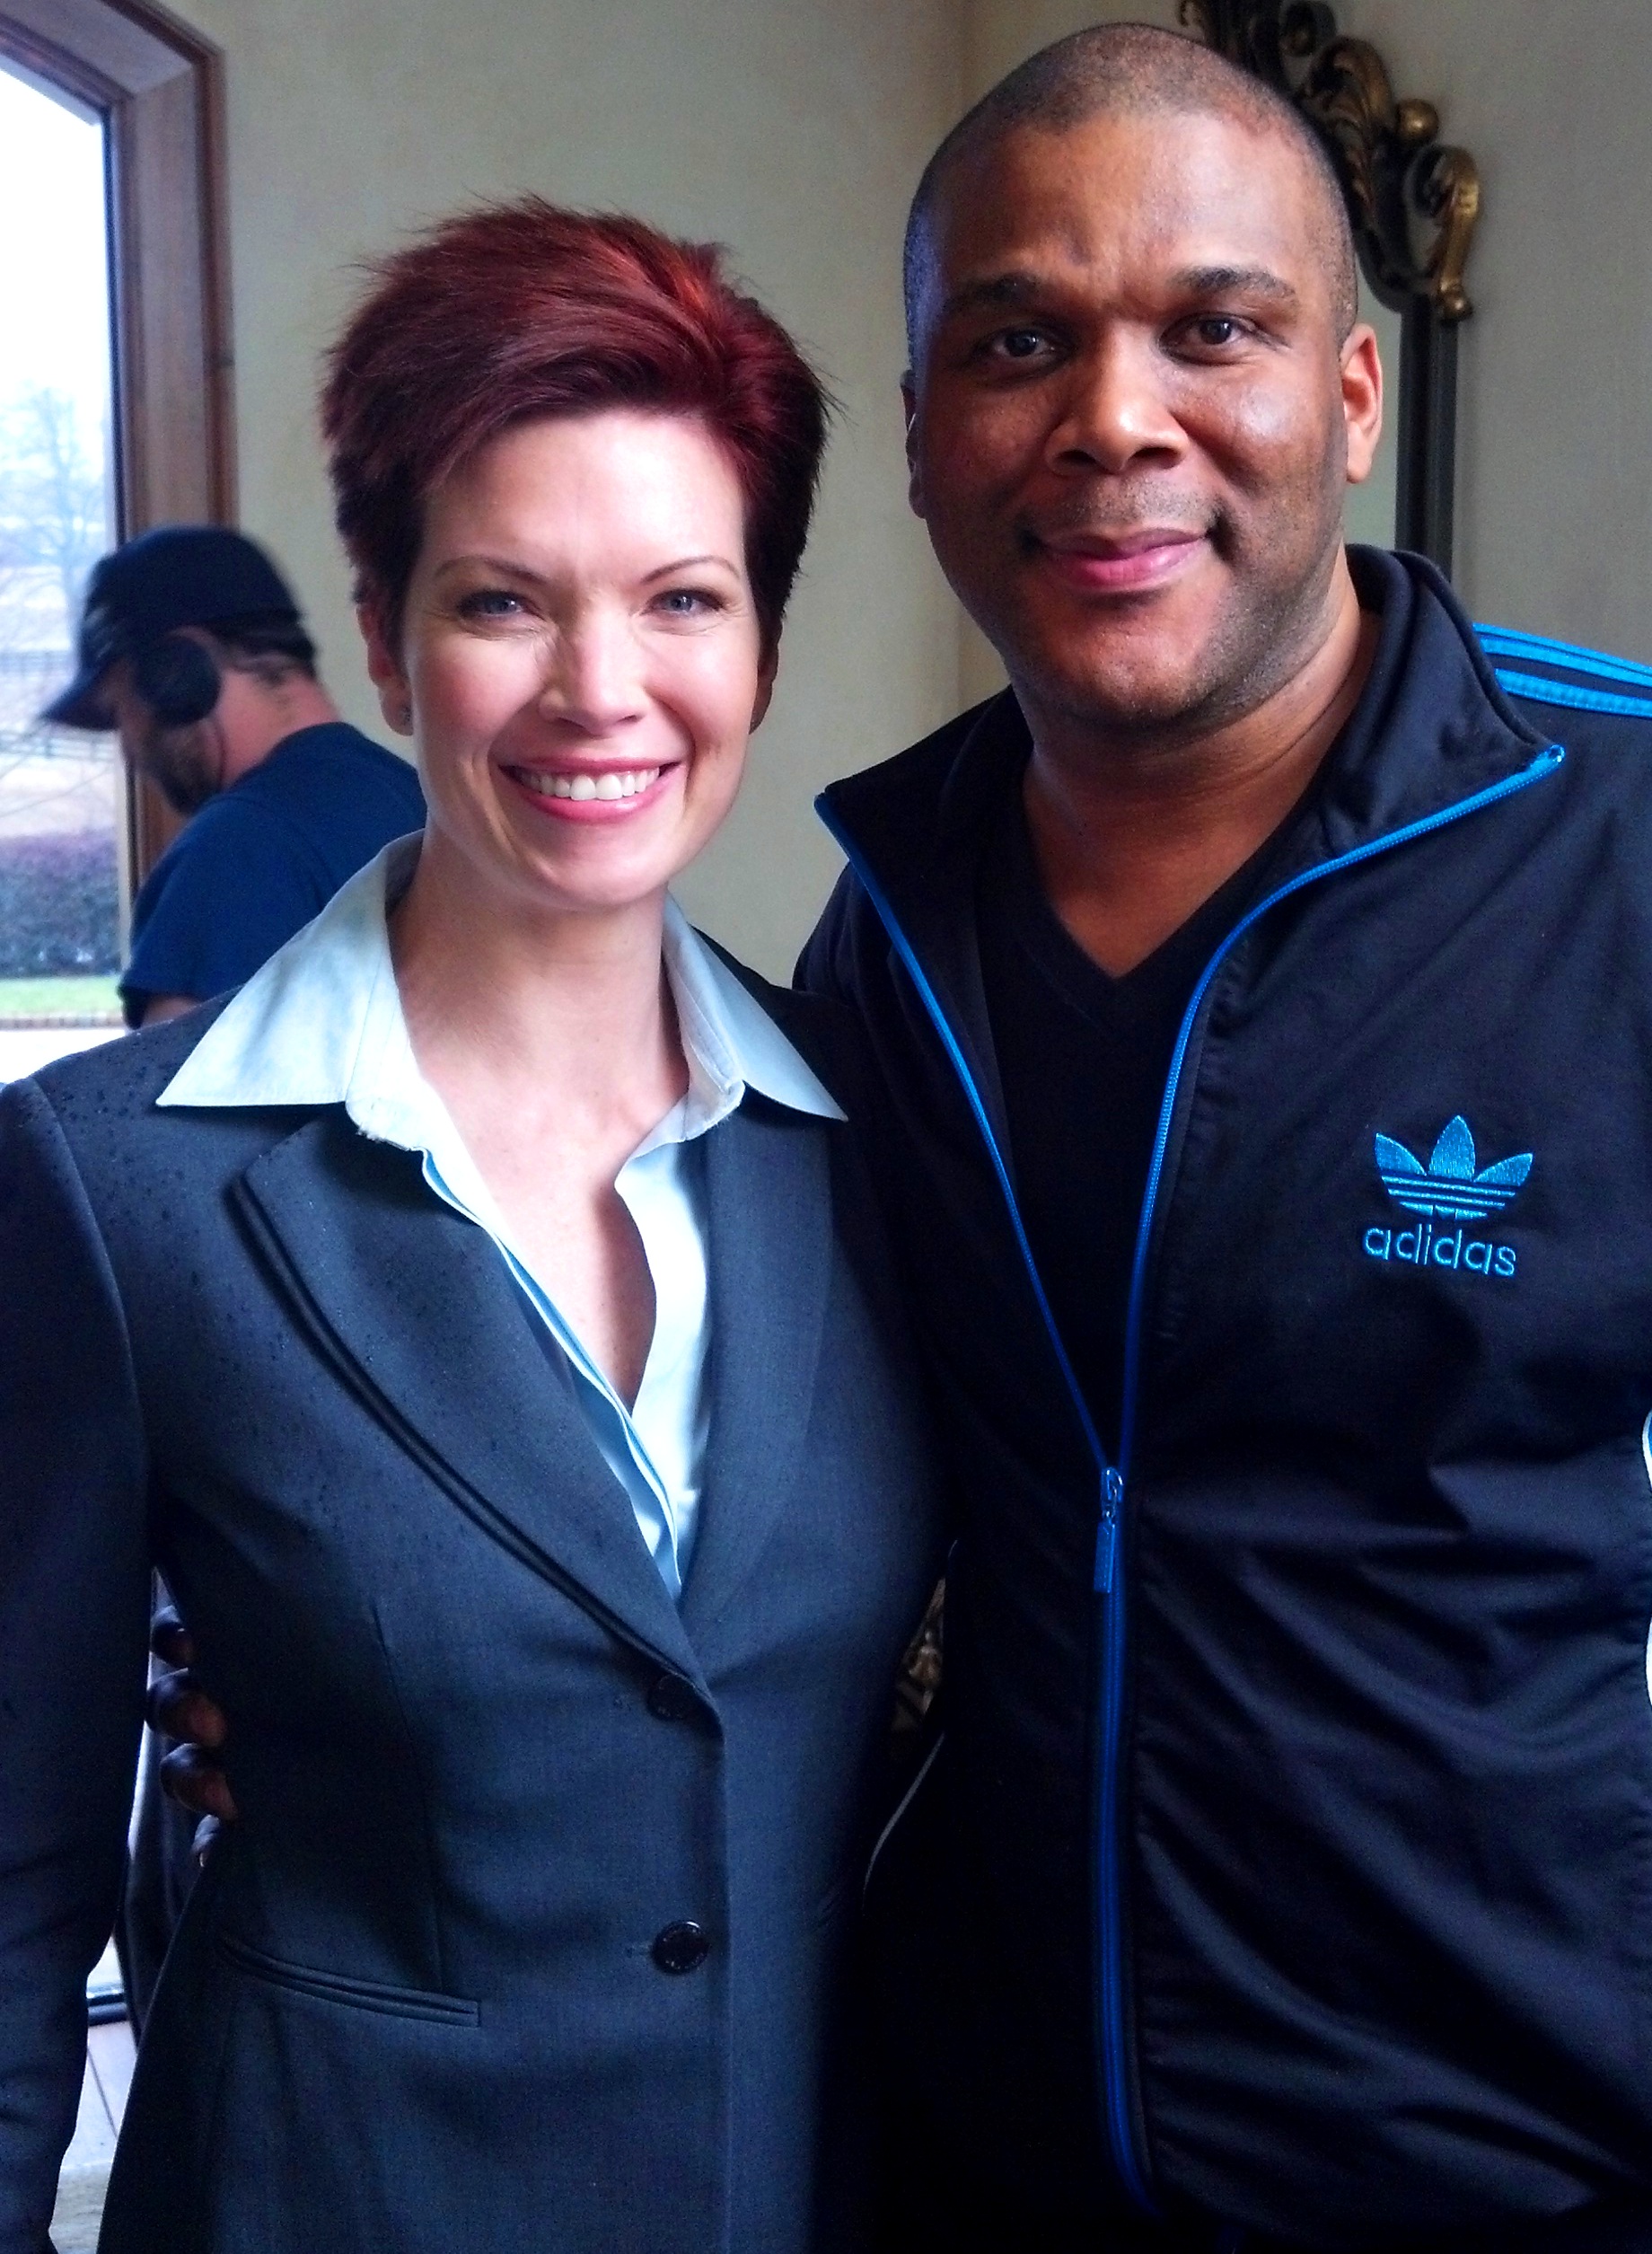 Eaddy Mays, as FBI Agent Thomas, with Mr. Tyler Perry on the set of 